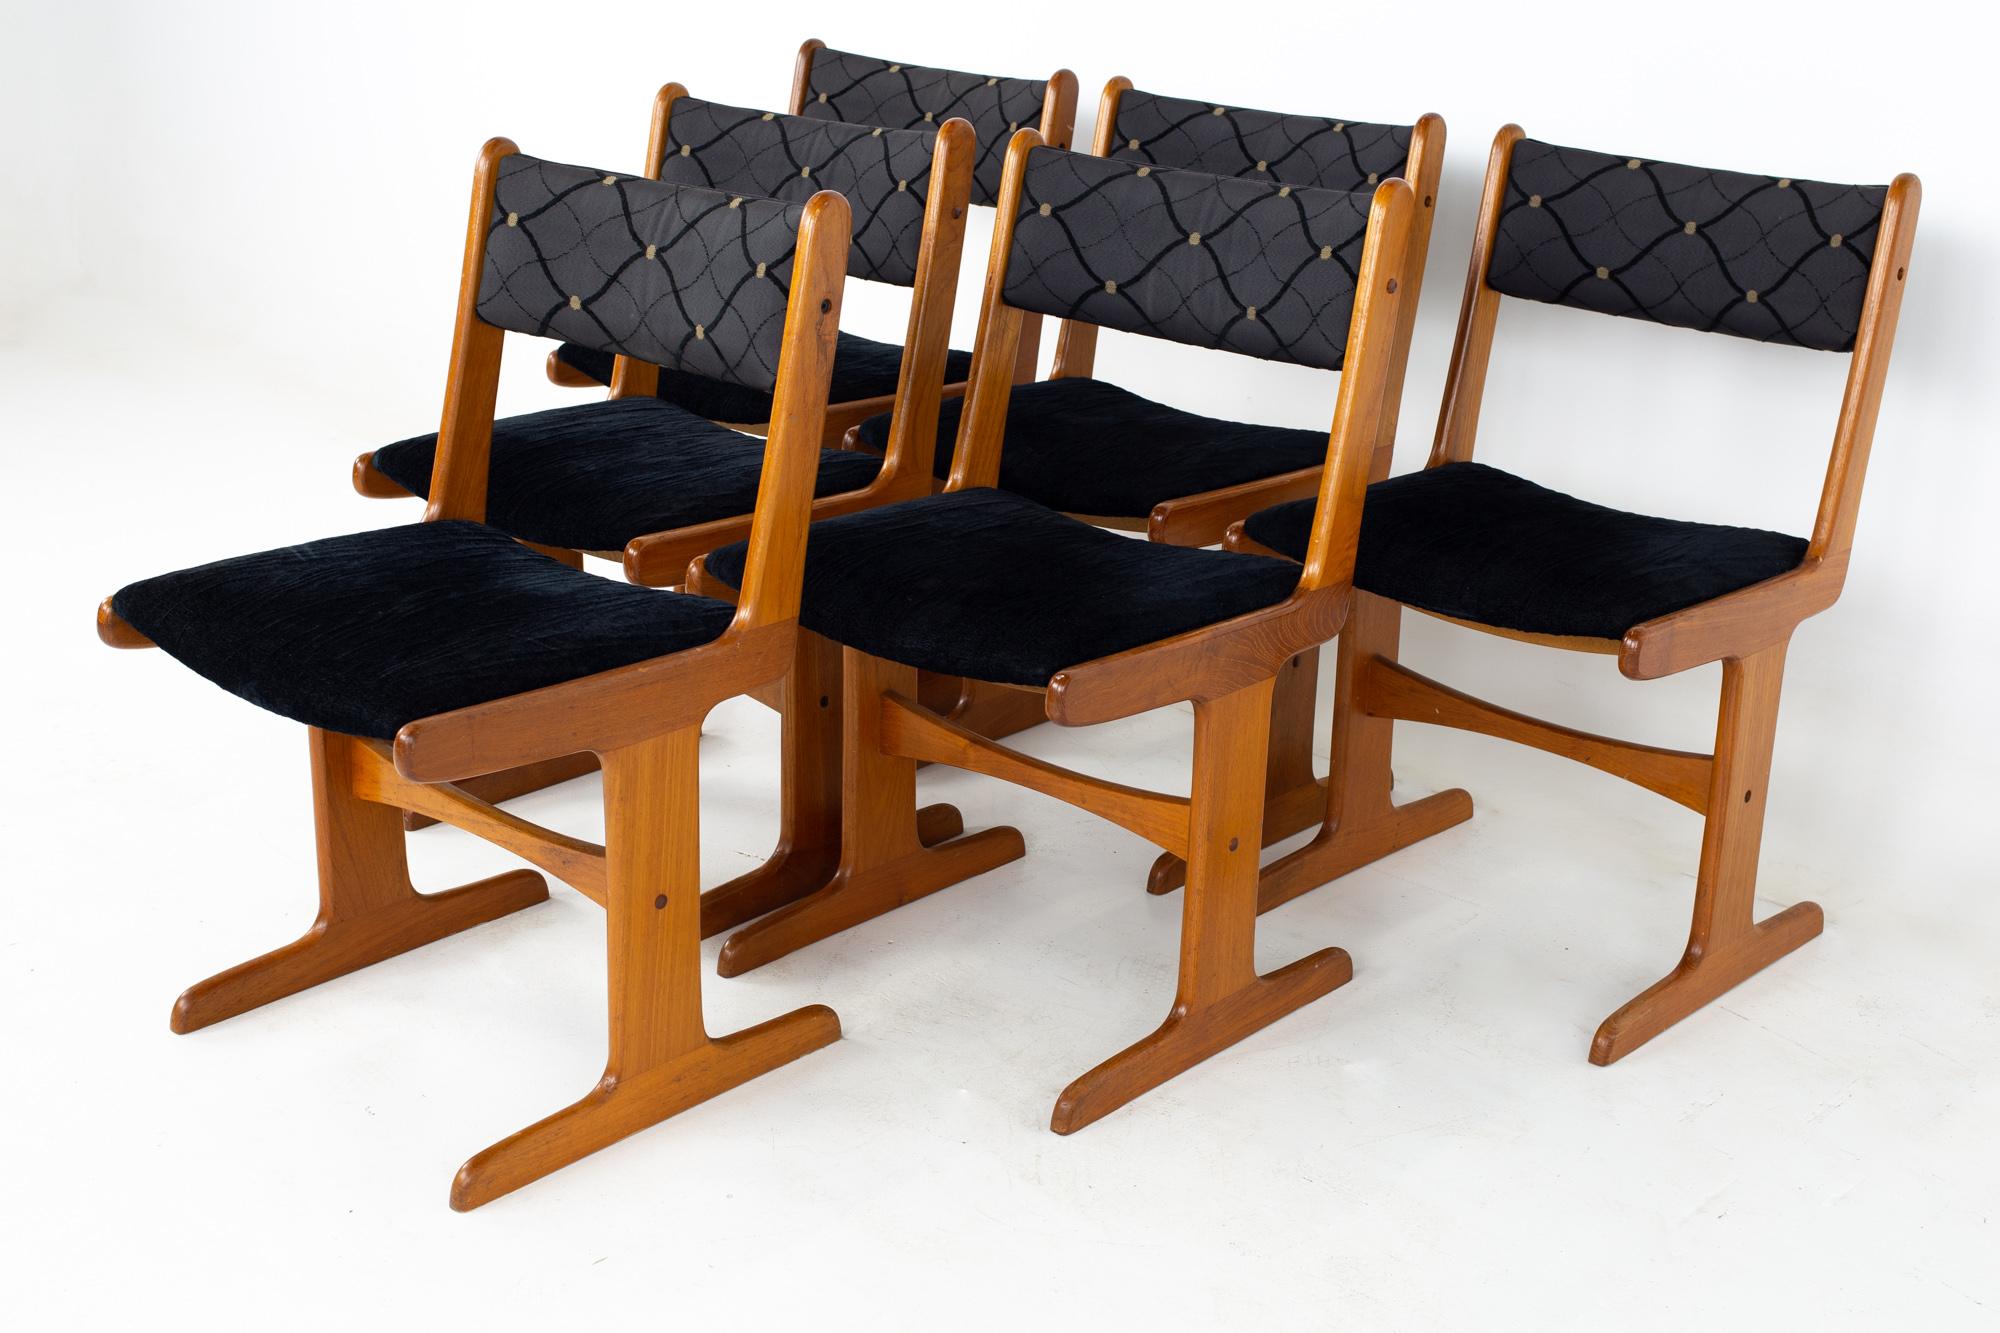 Gangso Mobler style Mid Century teak dining chairs, set of 6
Each chair measures: 18.75 wide x 16 deep x 32 high, with a seat height of 19 inches

All pieces of furniture can be had in what we call restored vintage condition. That means the piece